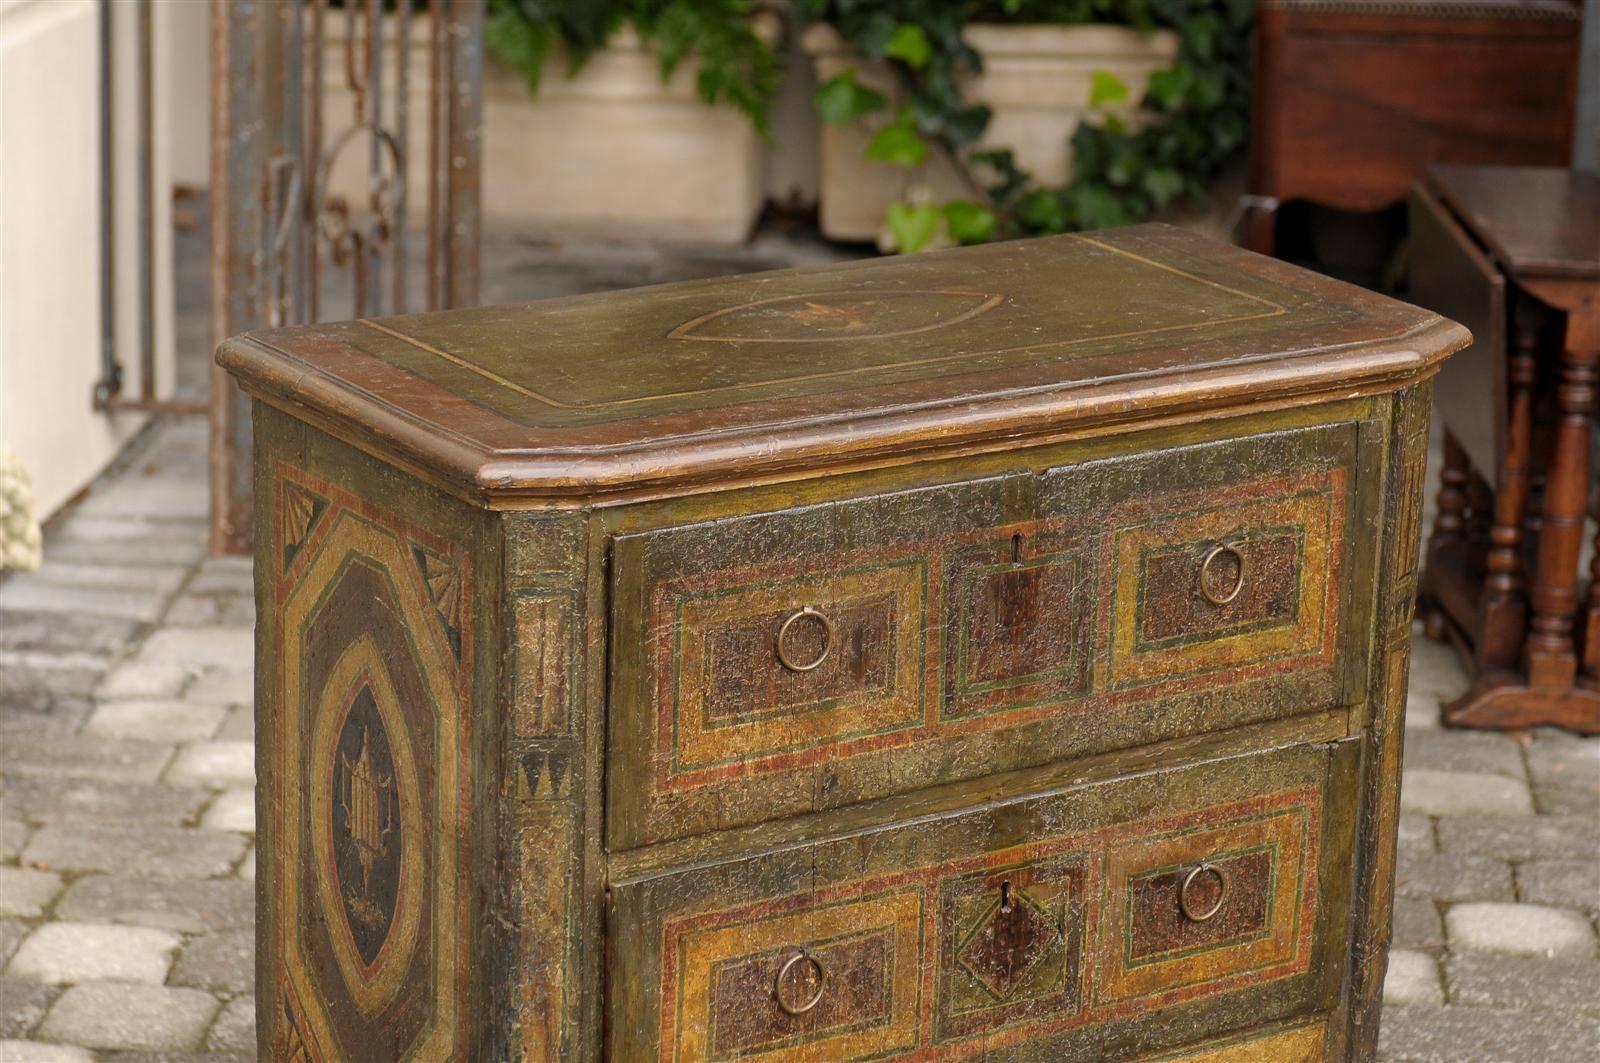 19th Century Italian Two-Drawer Commode with Rich Distressed Paint from the Early 1800s